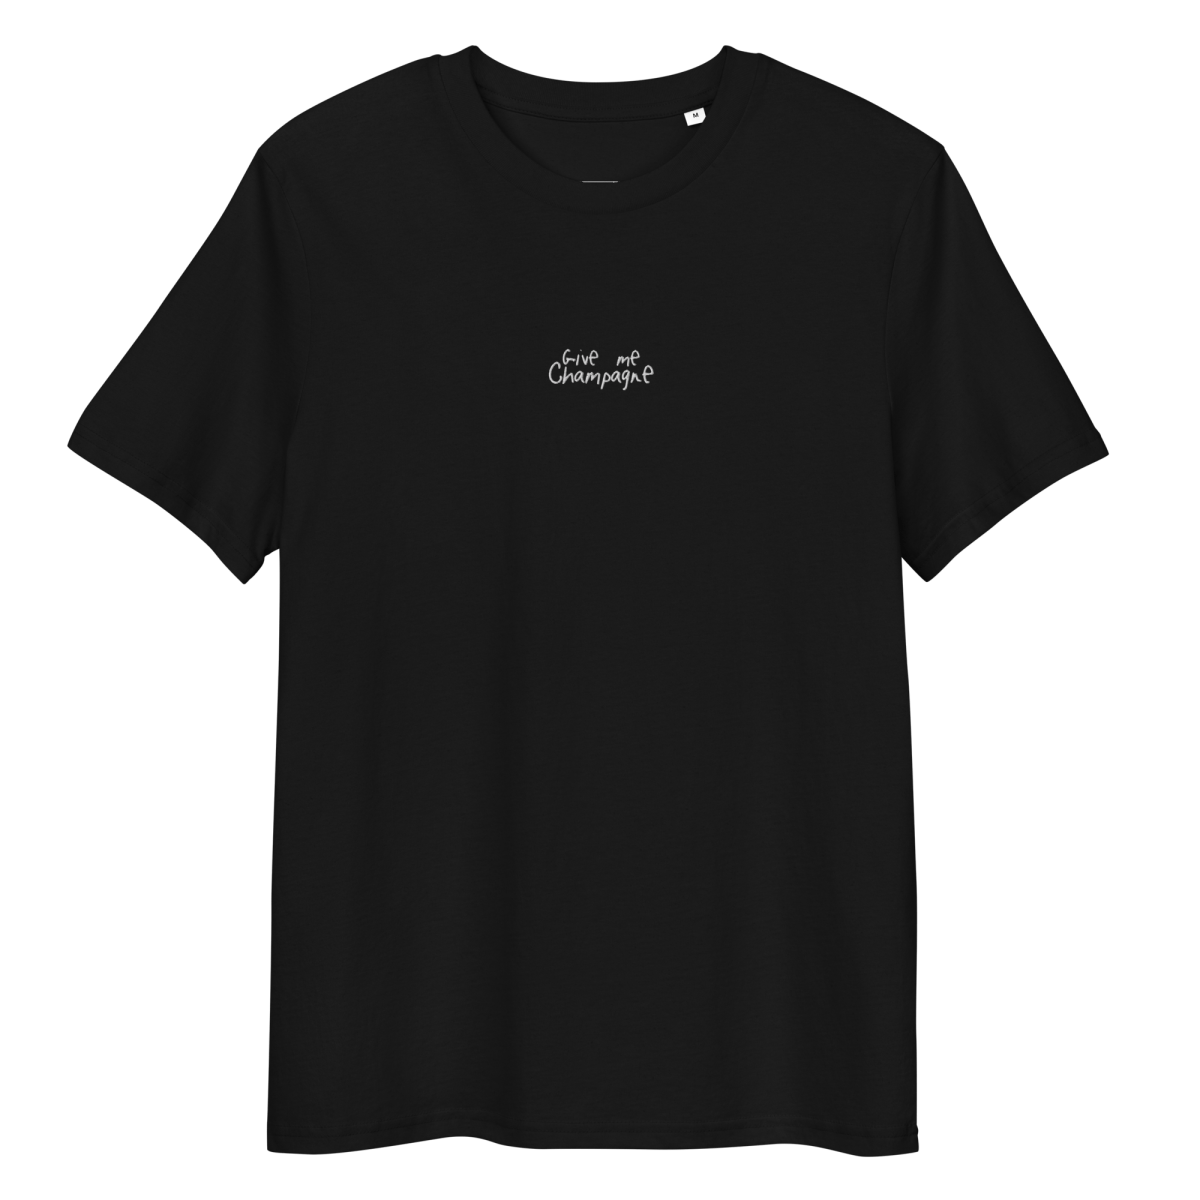 The Give Me Champagne organic t-shirt